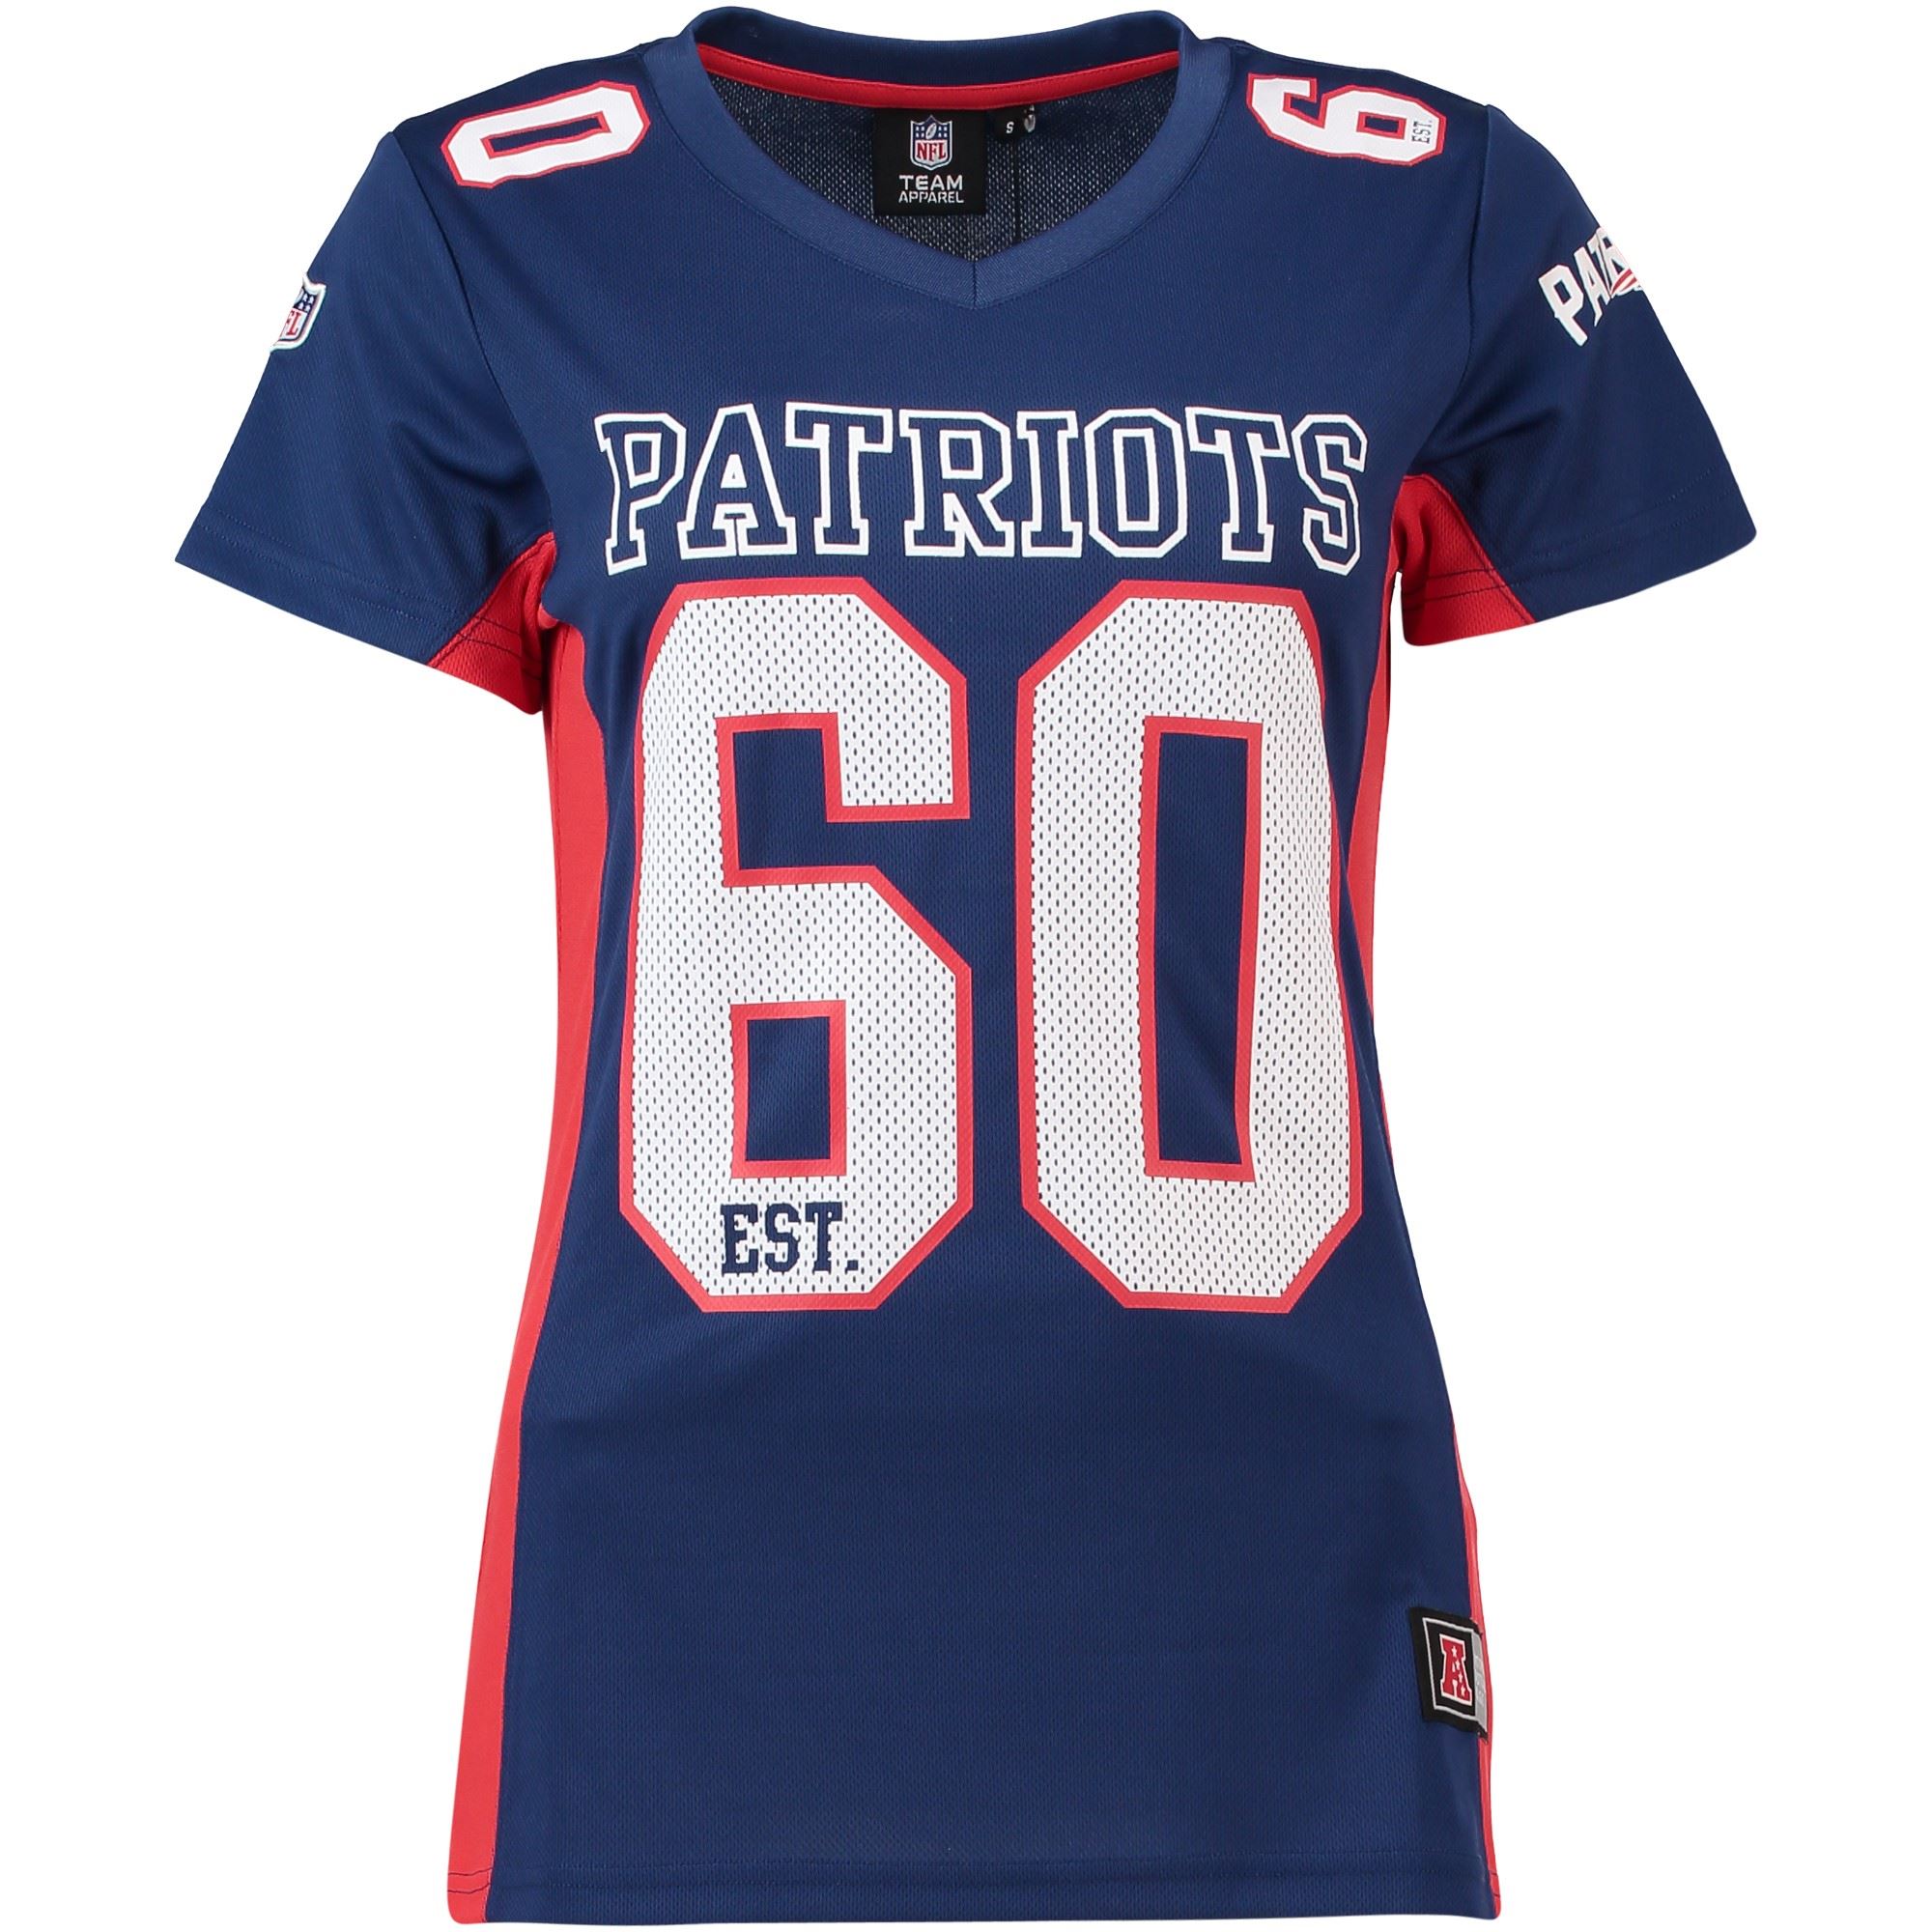 New England Patriots NFL Majestic Players Poly Mesh T-Shirt Women Collection Fanatics